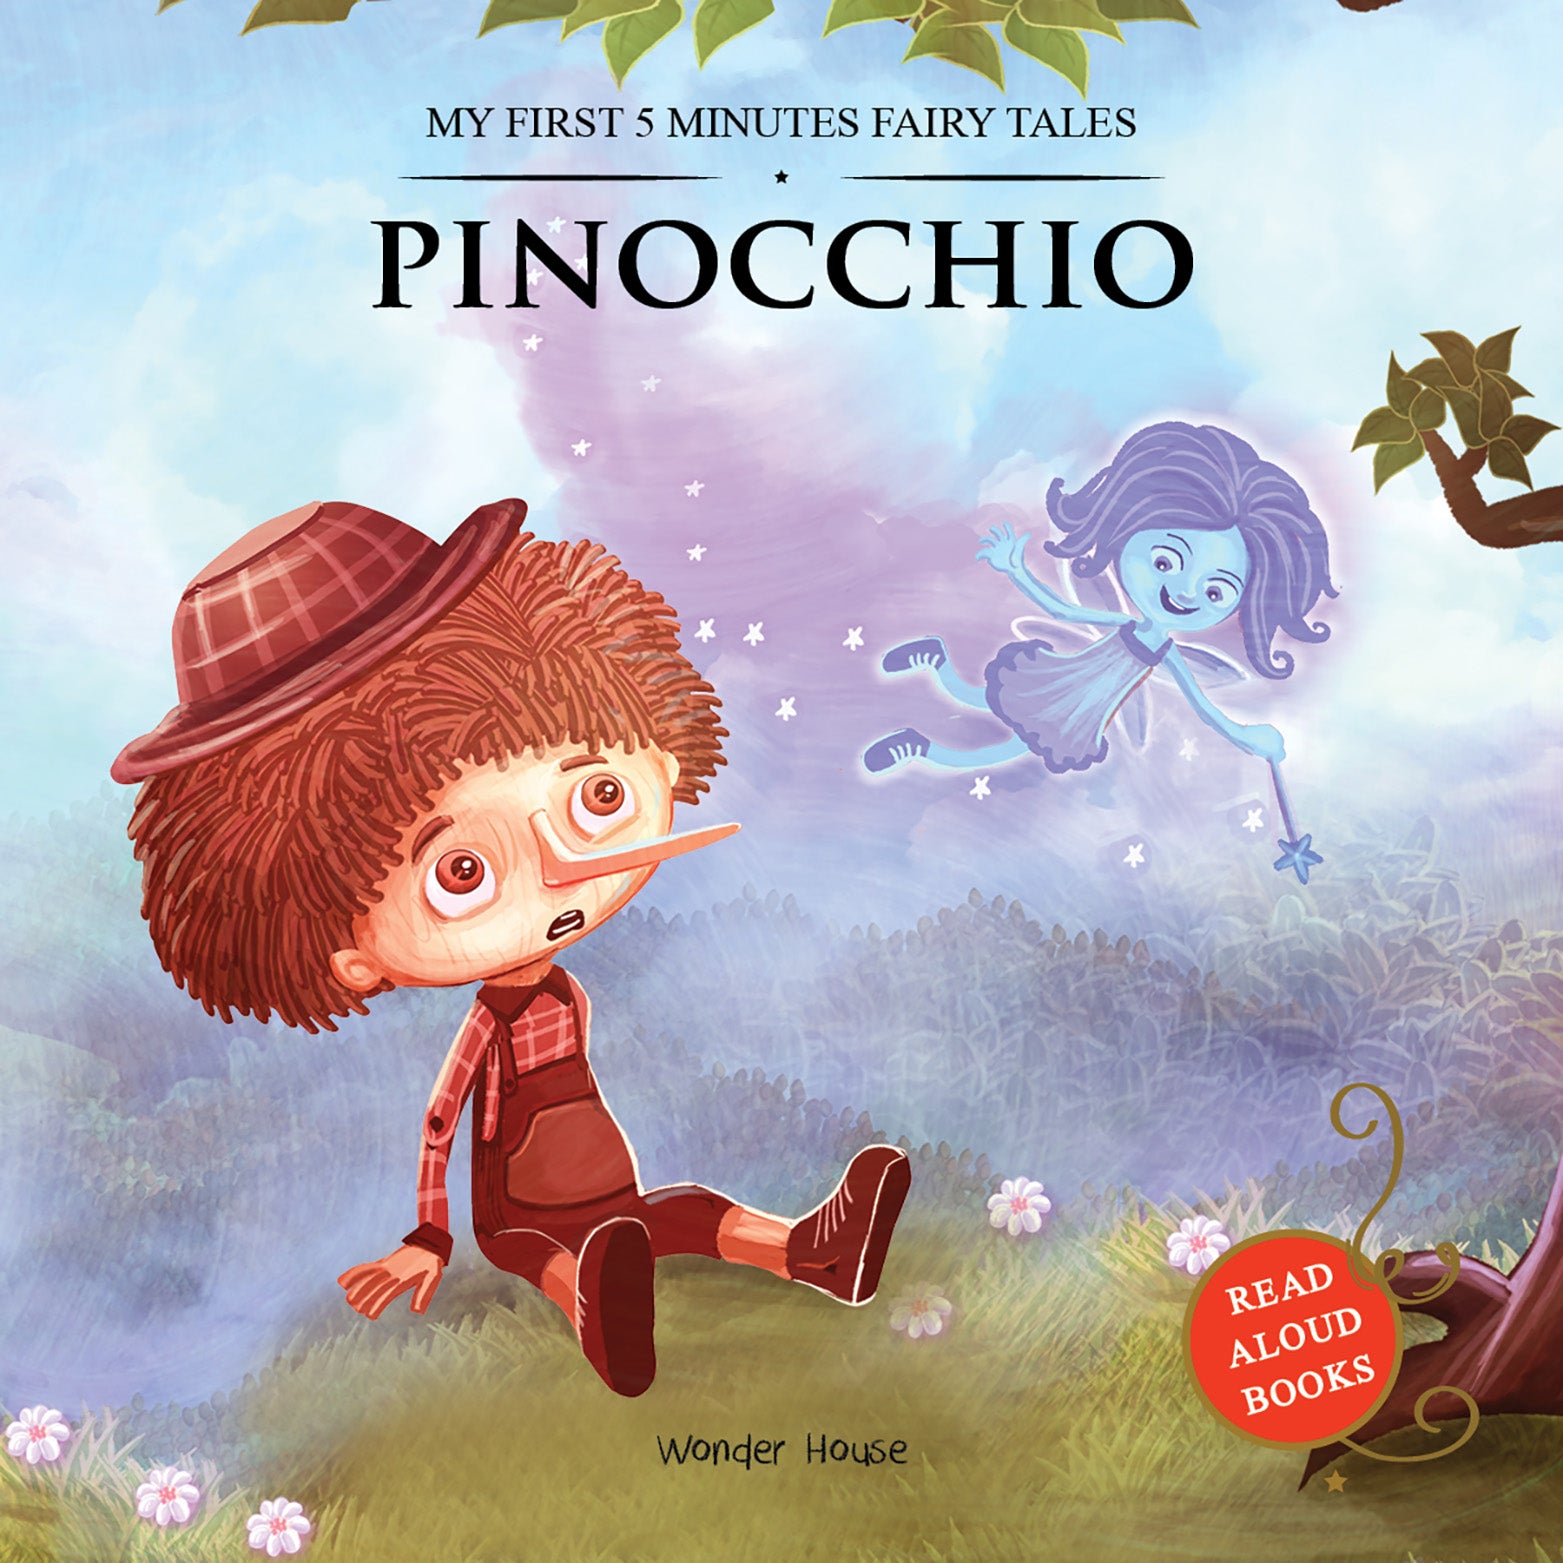 My First 5 Minutes Fairy Tales Pinocchio: Traditional Fairy Tales For Children (Abridged and Retold)